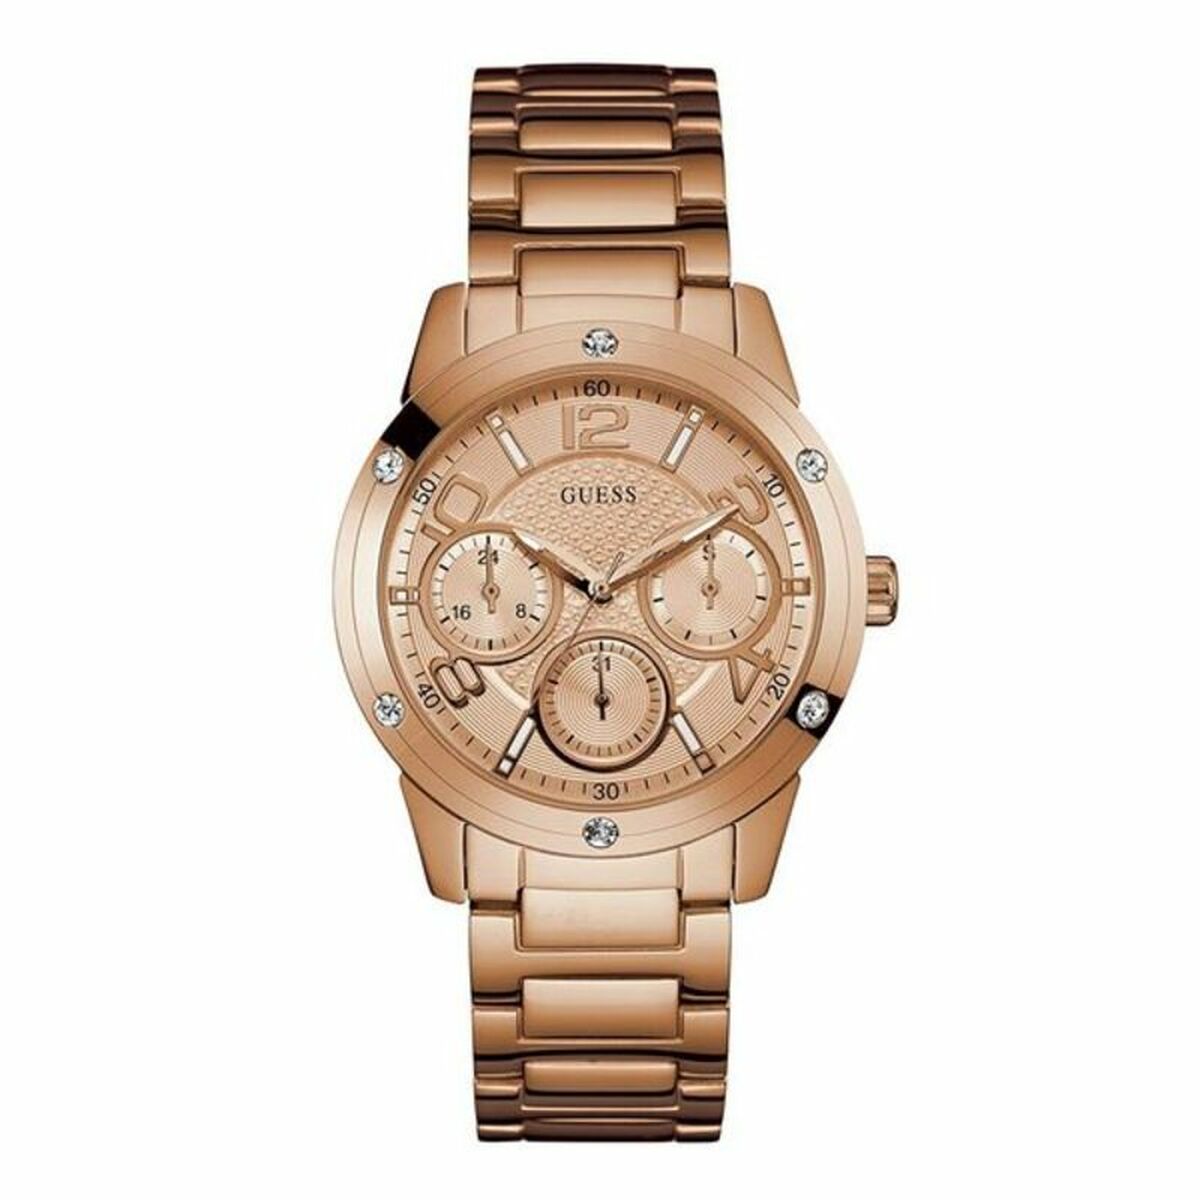 Ladies'Watch Guess W0778L3 (Ø 40 mm), Guess, Watches, Women, ladieswatch-guess-w0778l3-o-40-mm, Brand_Guess, category-reference-2570, category-reference-2635, category-reference-2662, category-reference-2682, category-reference-2995, category-reference-t-19667, category-reference-t-19725, Condition_NEW, fashion, original gifts, Price_100 - 200, RiotNook